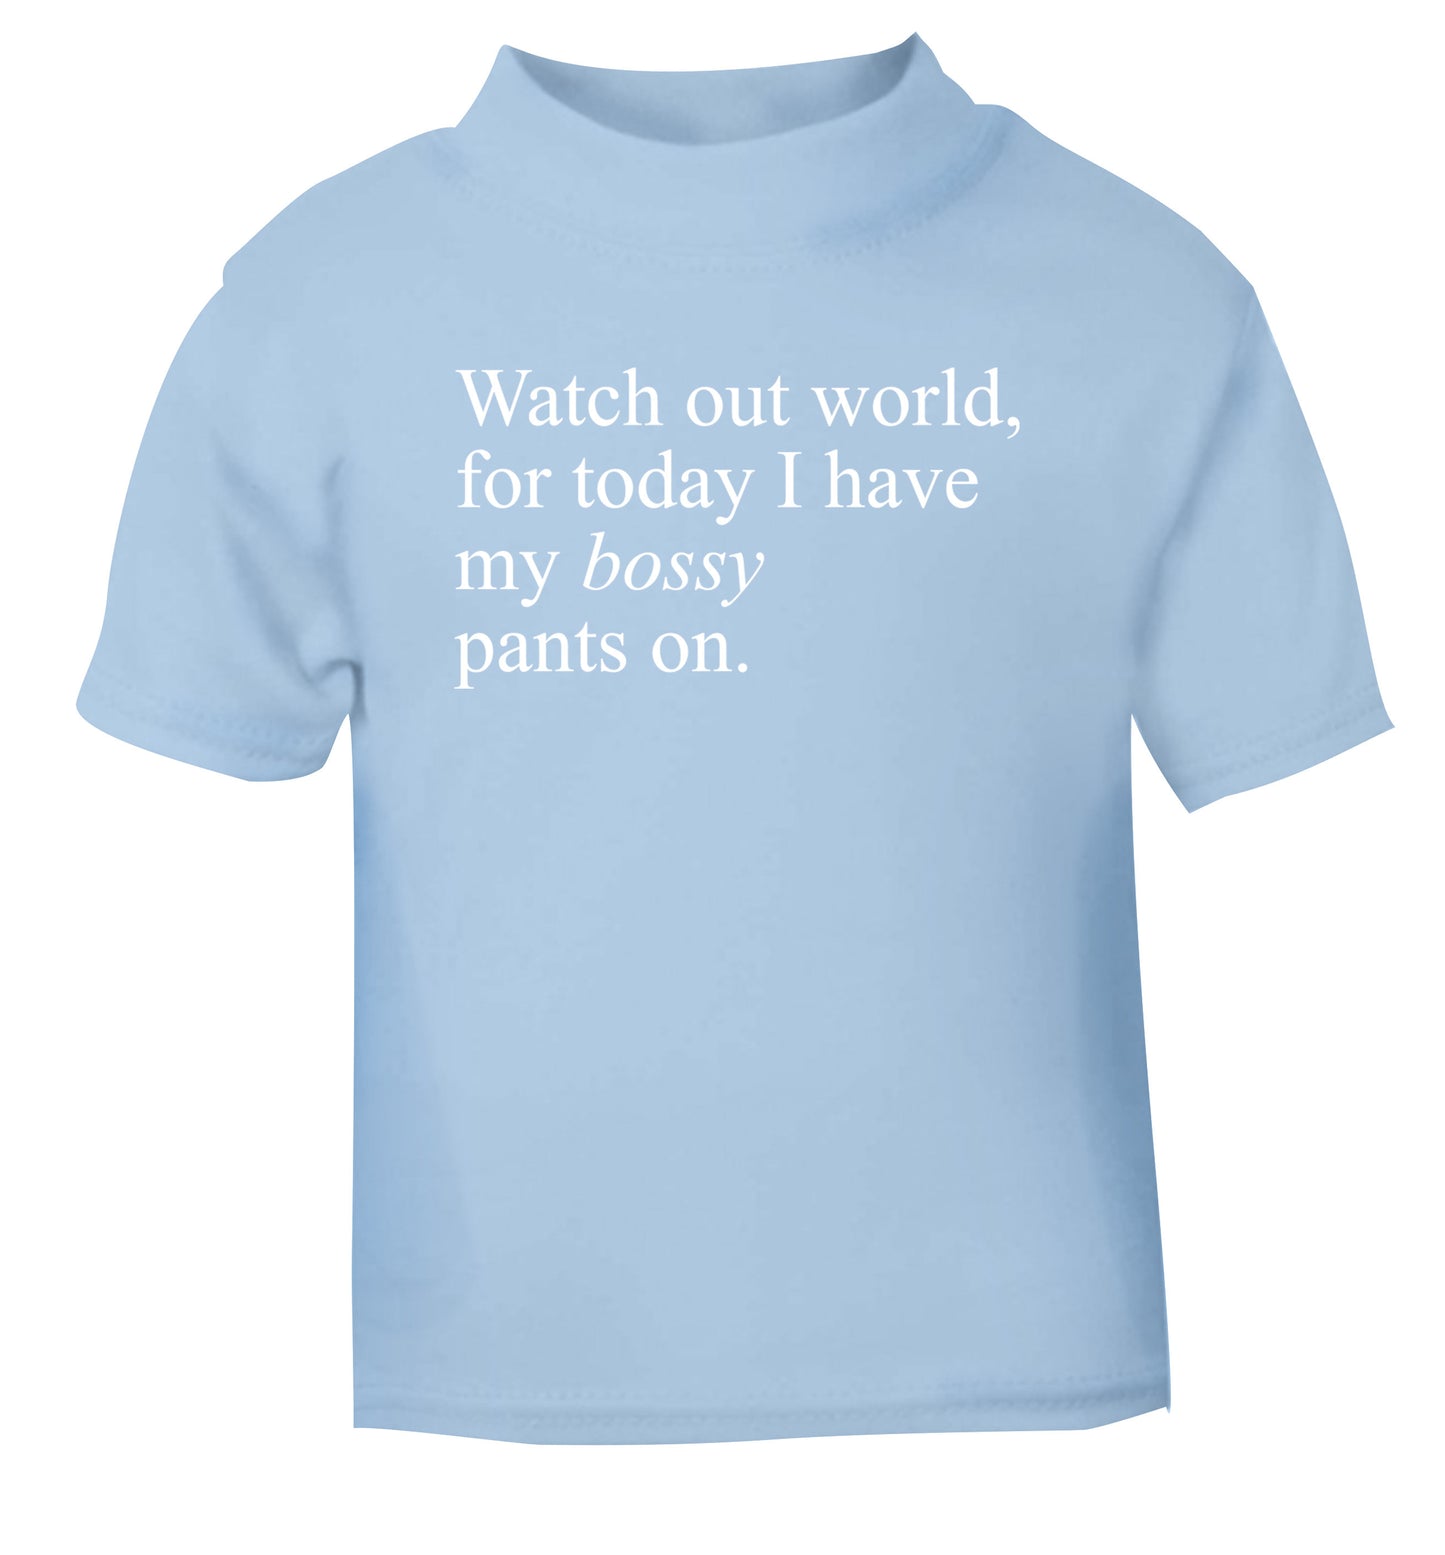 Watch out world, for today I have my bossy pants on light blue Baby Toddler Tshirt 2 Years